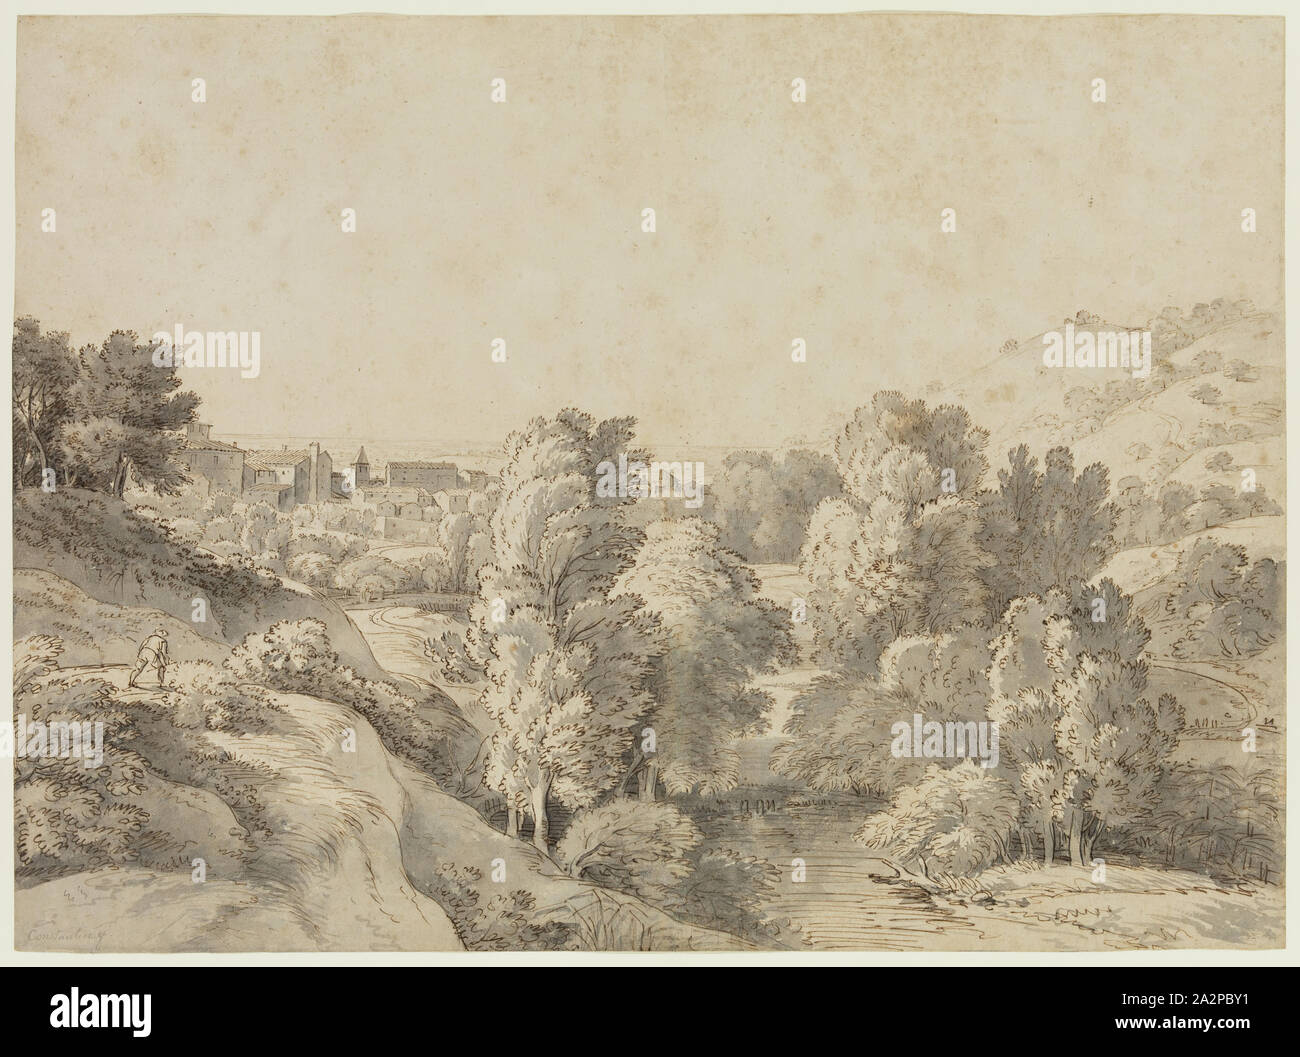 Jean Antoine Constantin, French, 1756-1844, Landscape, Pen and brown ink with brush and grey wash on cream laid paper, Sheet: 15 1/4 x 20 5/8 in. (38.8 x 52.4 cm Stock Photo